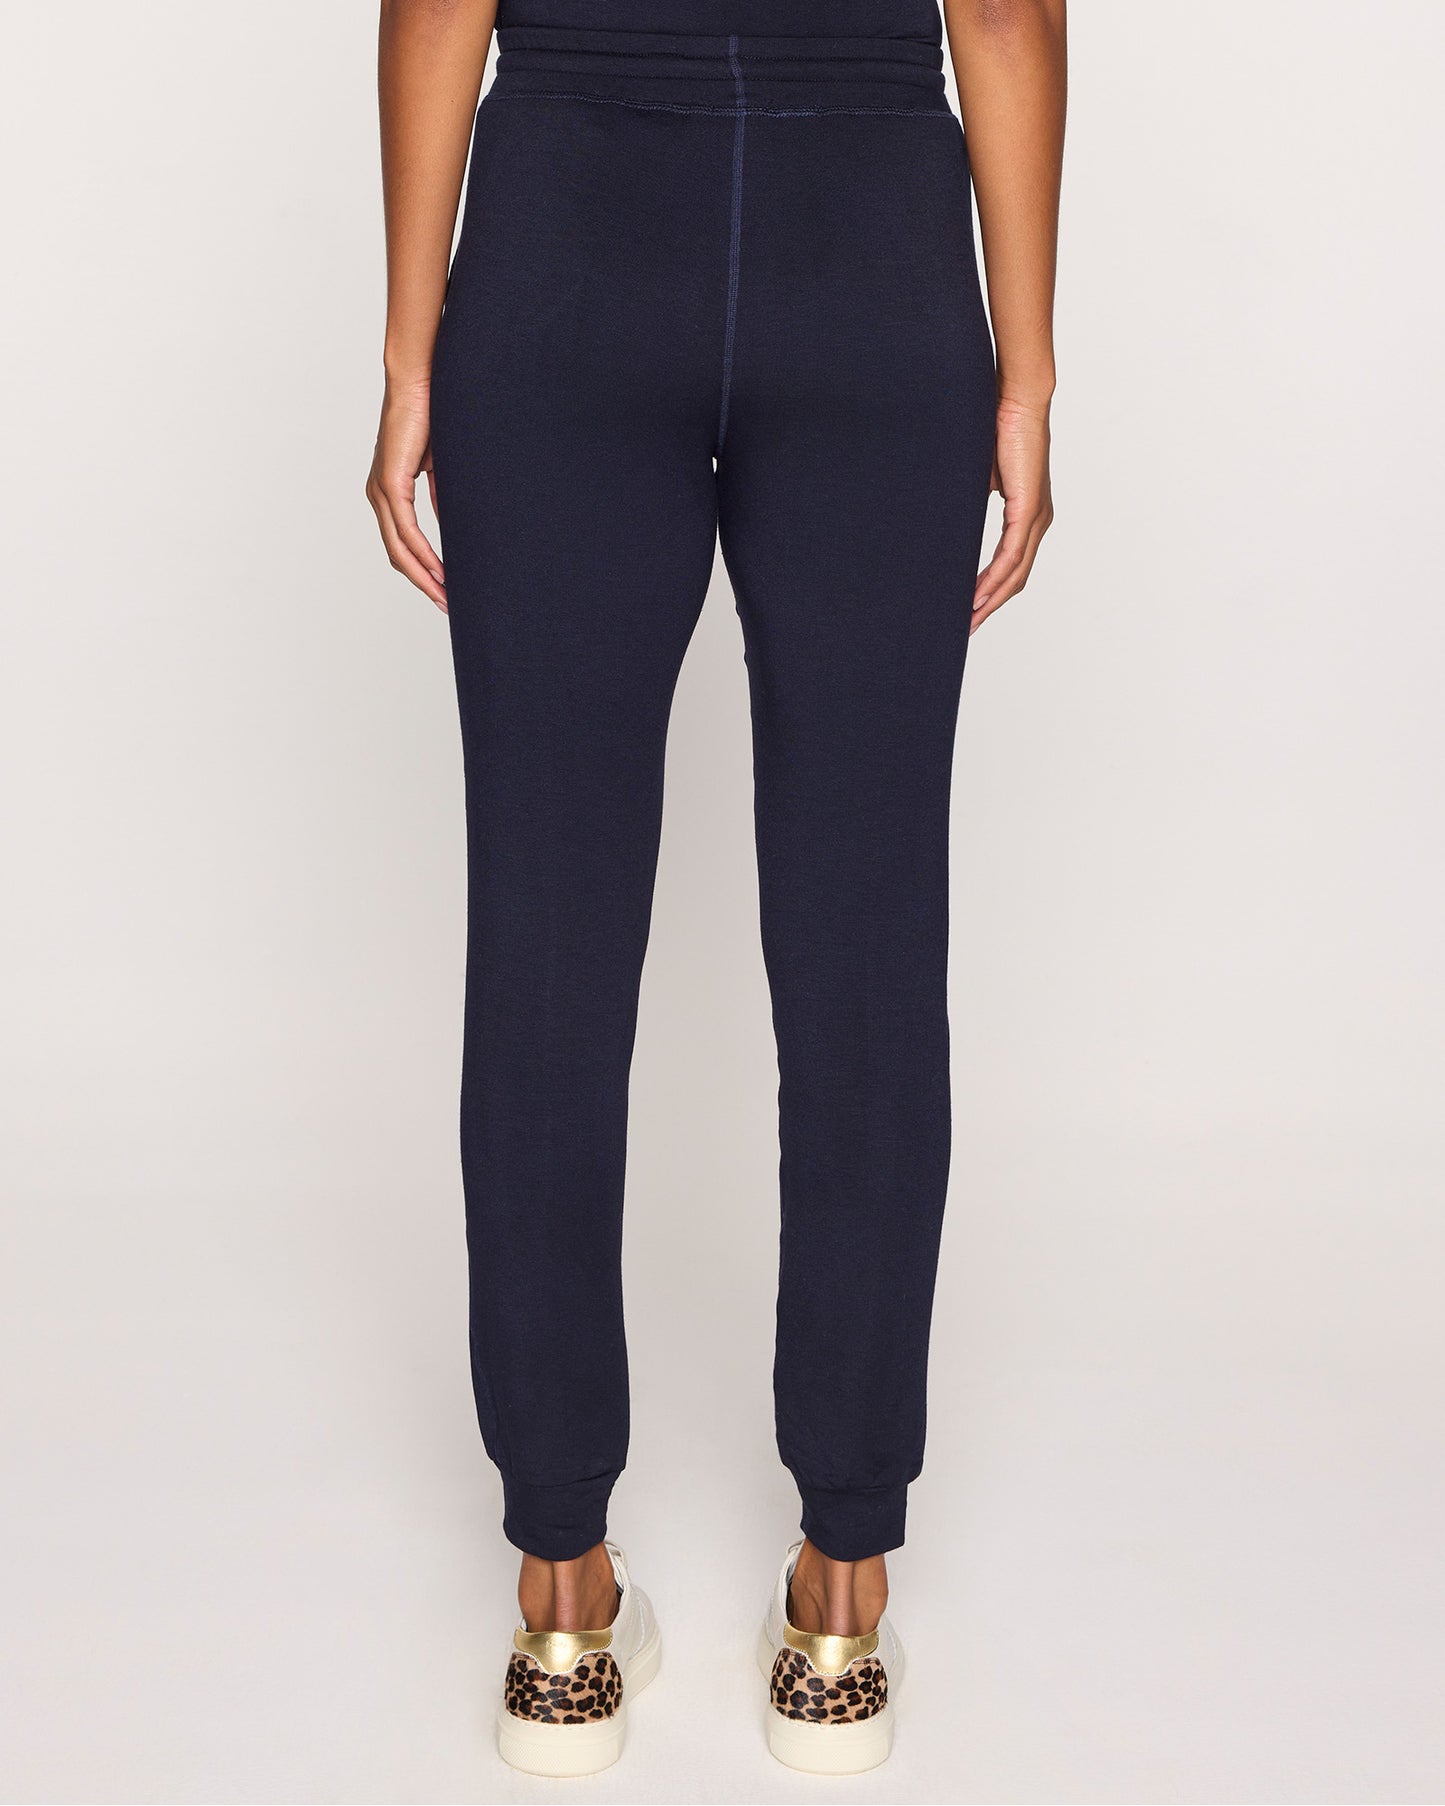 The Women's Elevated Jogger